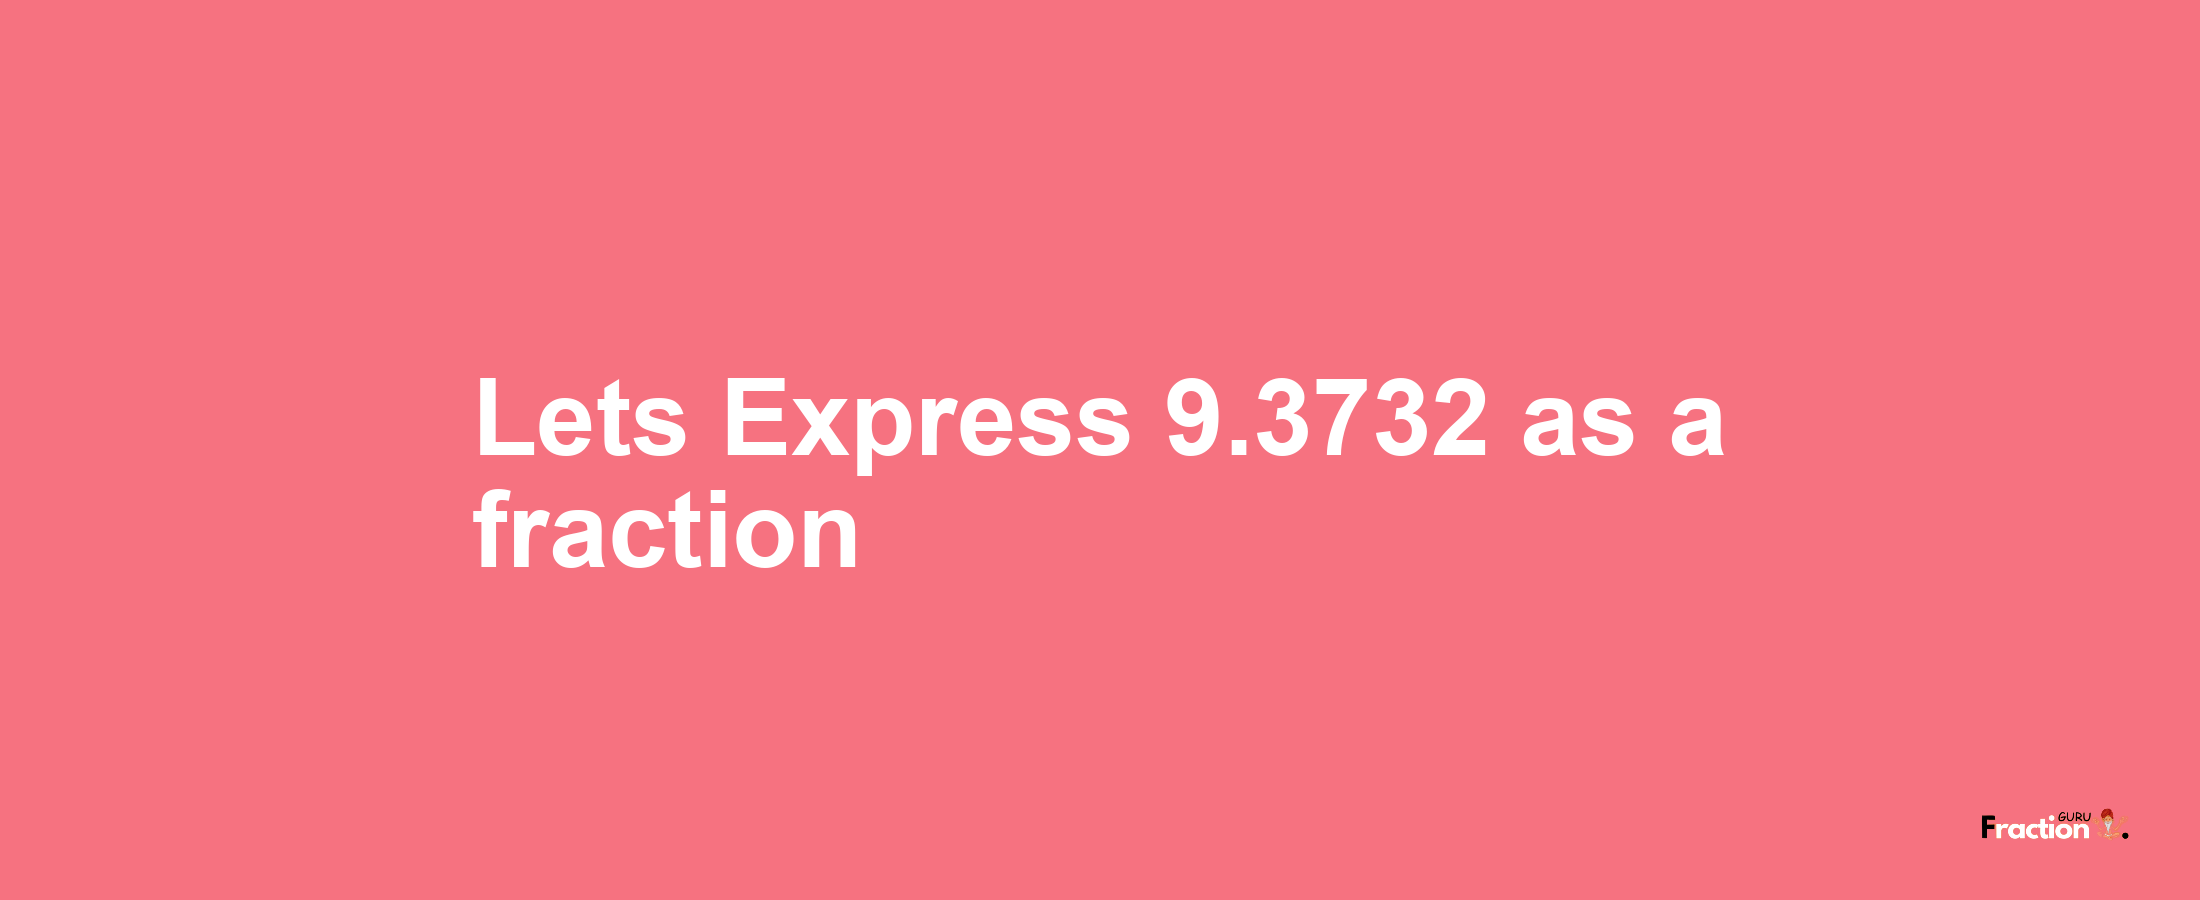 Lets Express 9.3732 as afraction